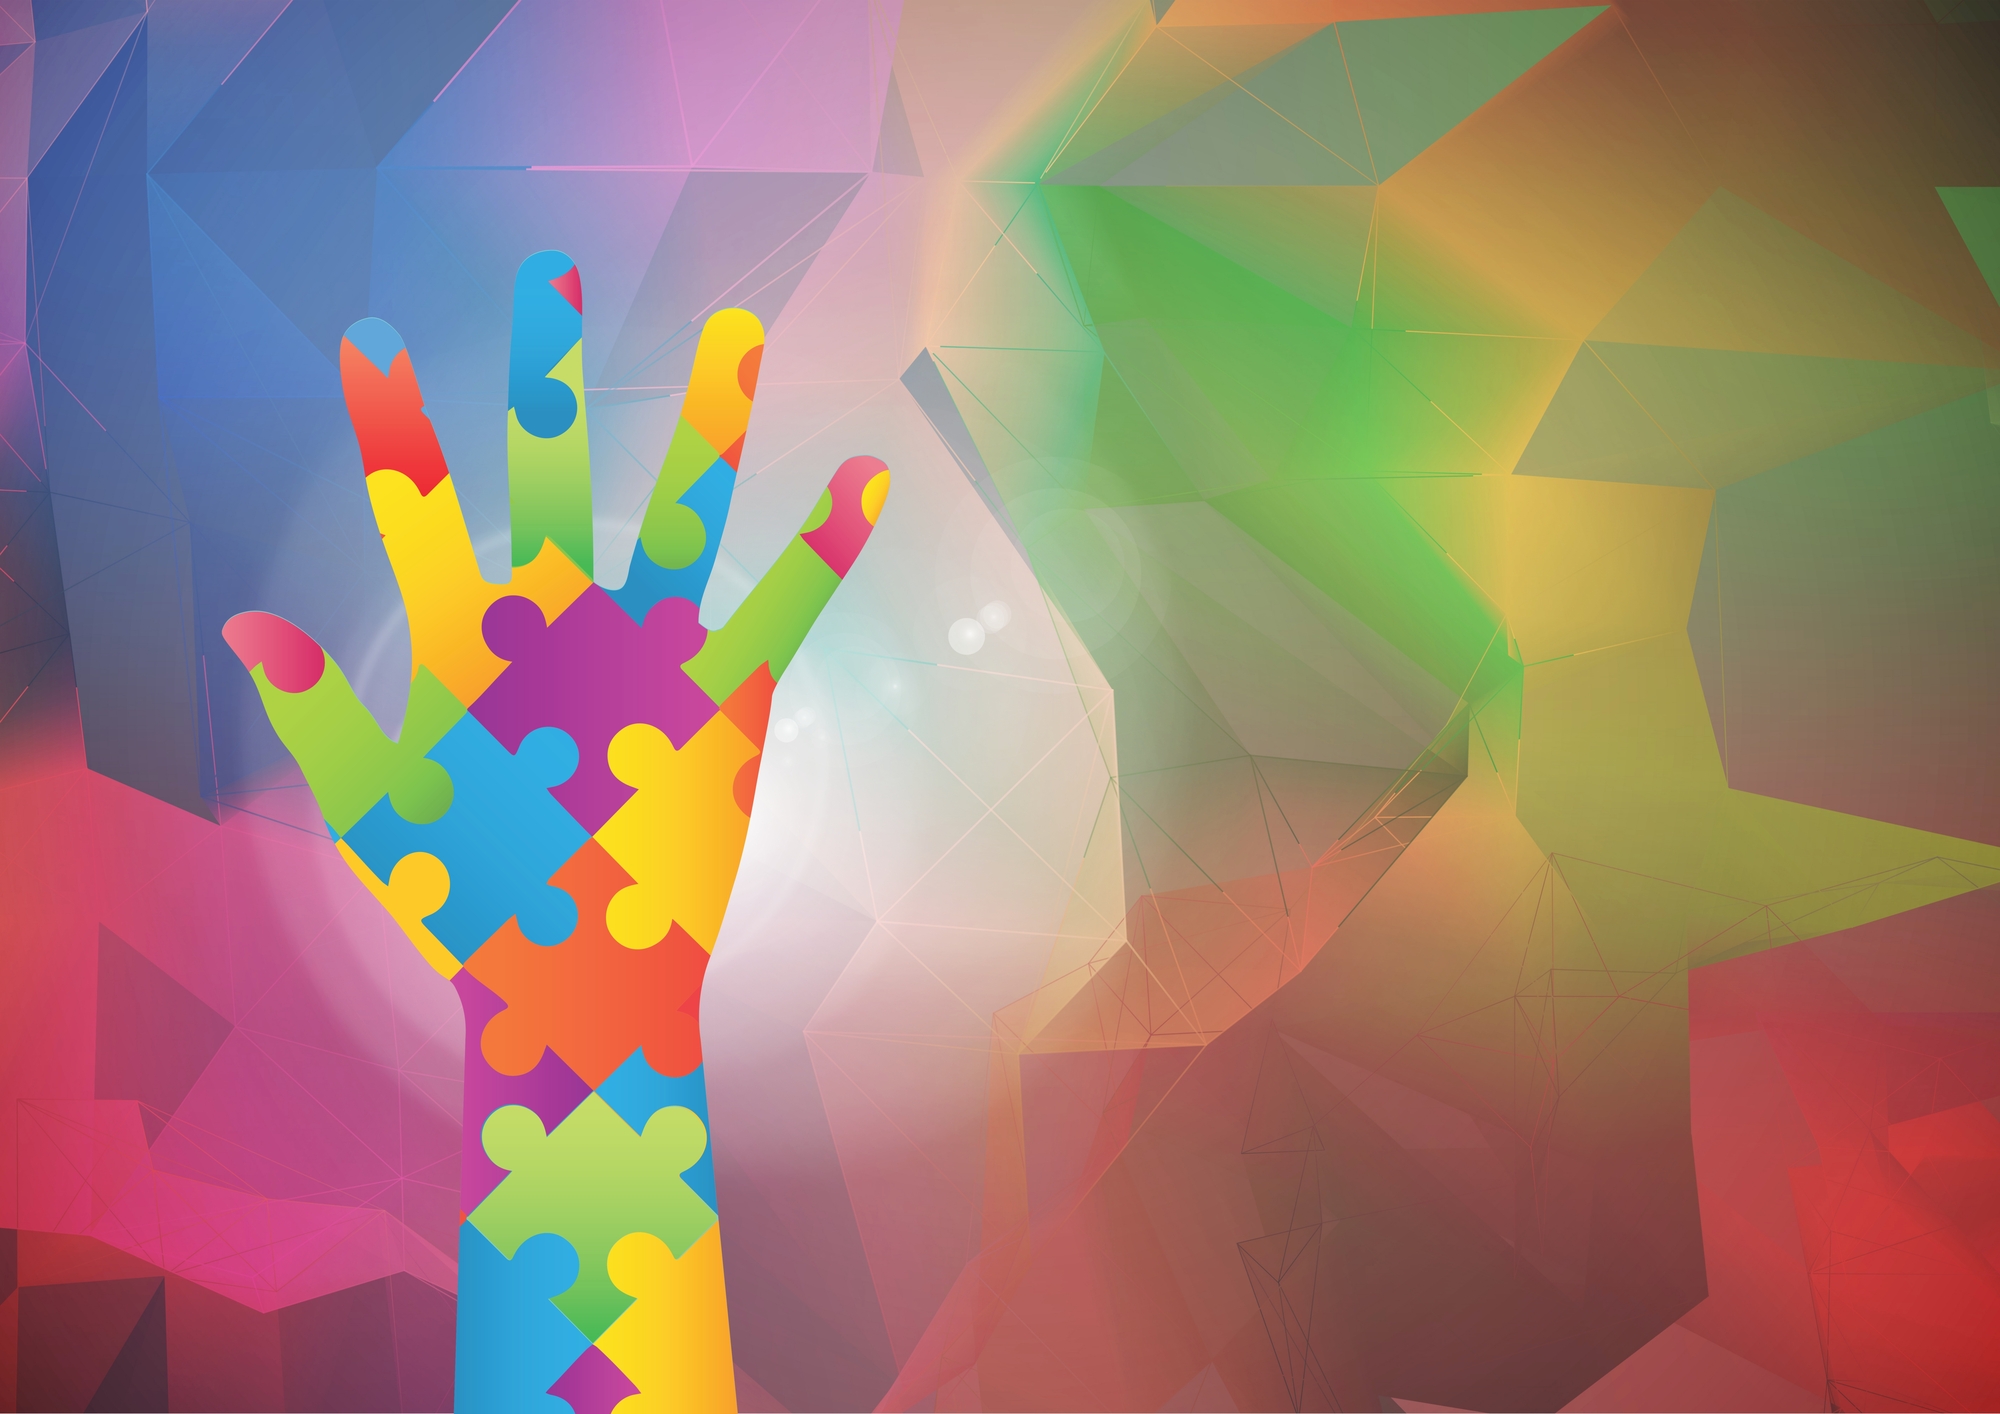 Digital composite of Multicolored Hand against colorful background